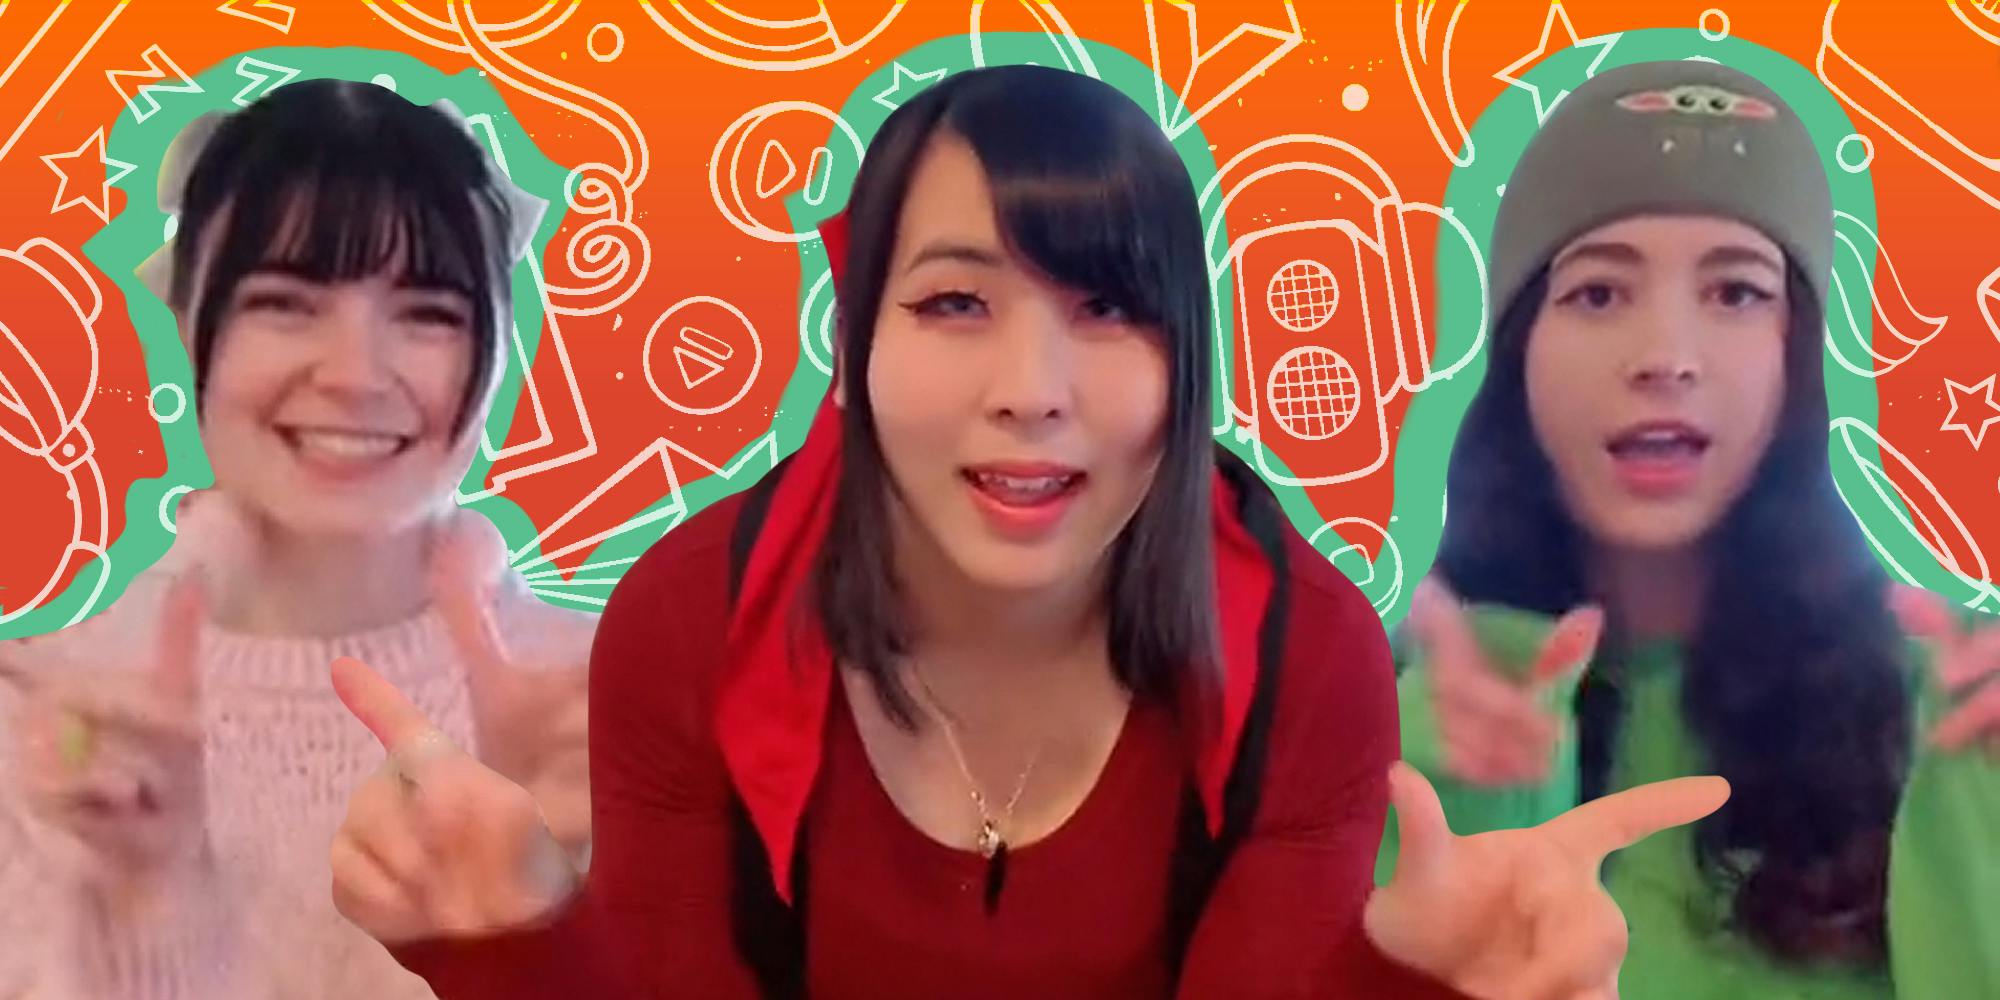 J-Pop TikTok Group’s Asian Accent Controversy Reignites Age-Old Debate Over Appropriation